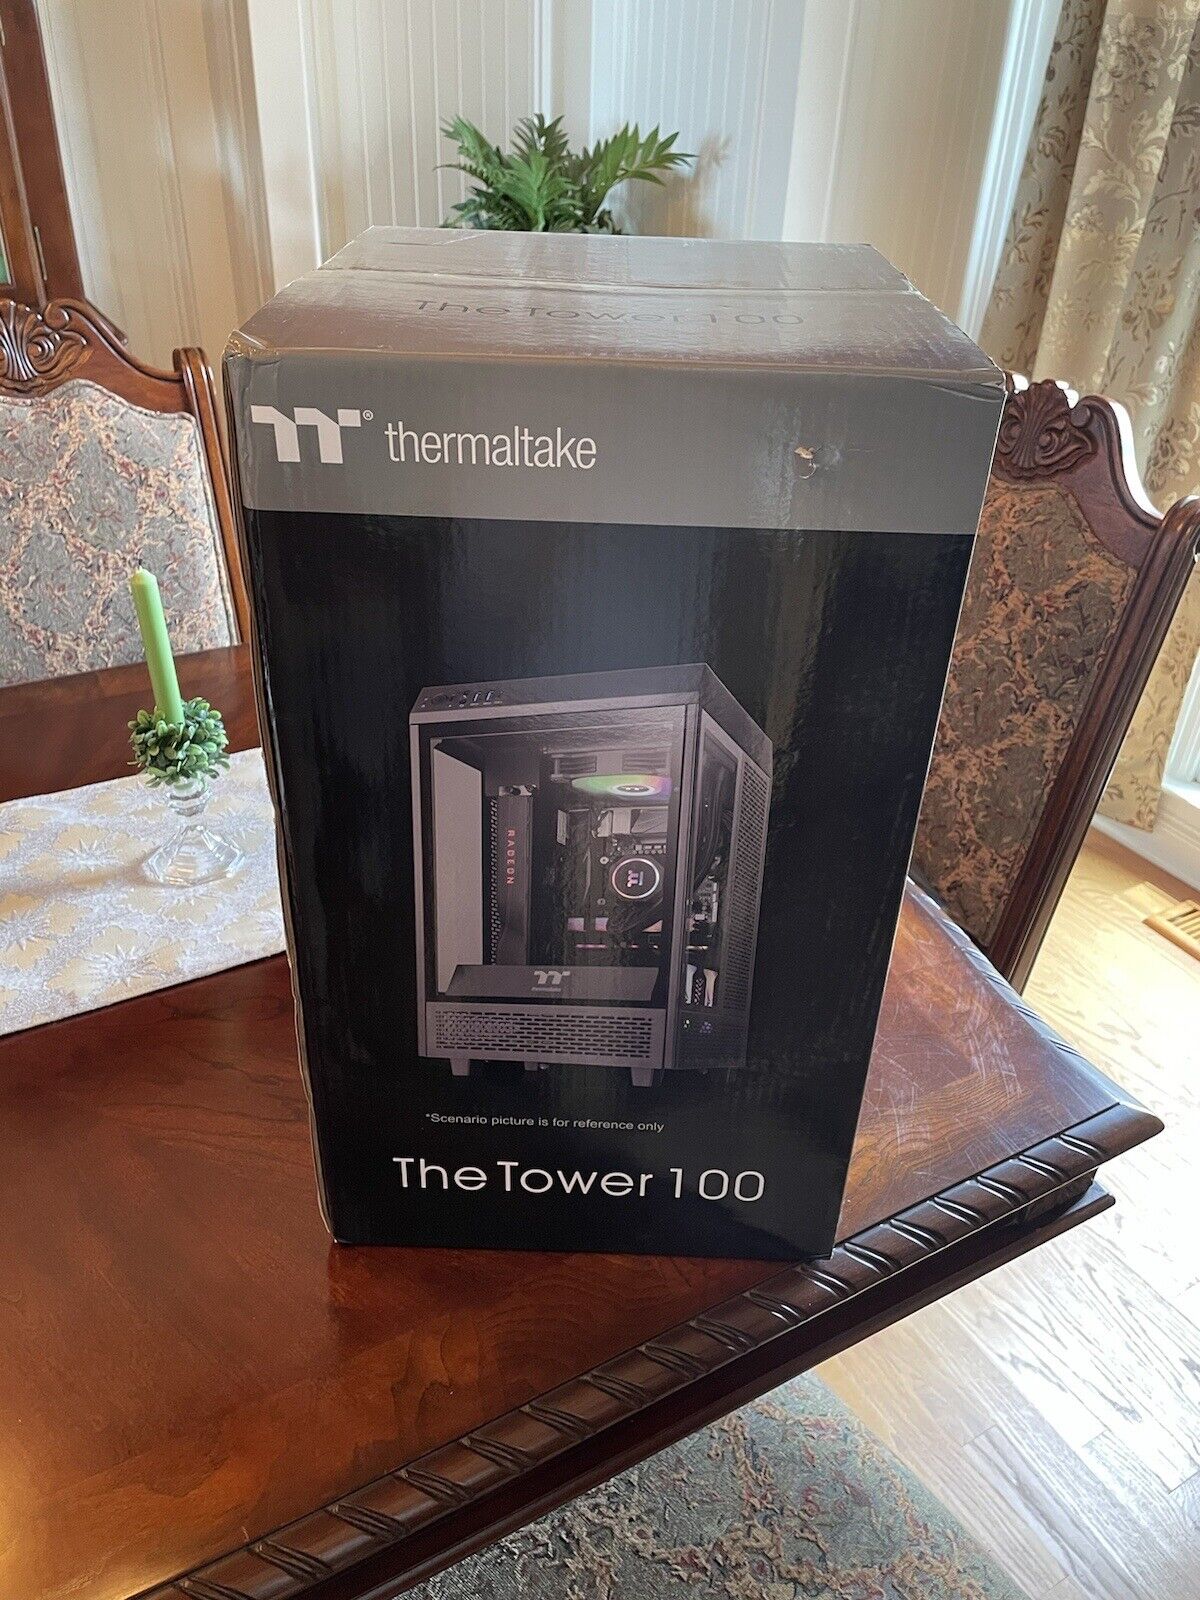 thermaltake - The Tower 100